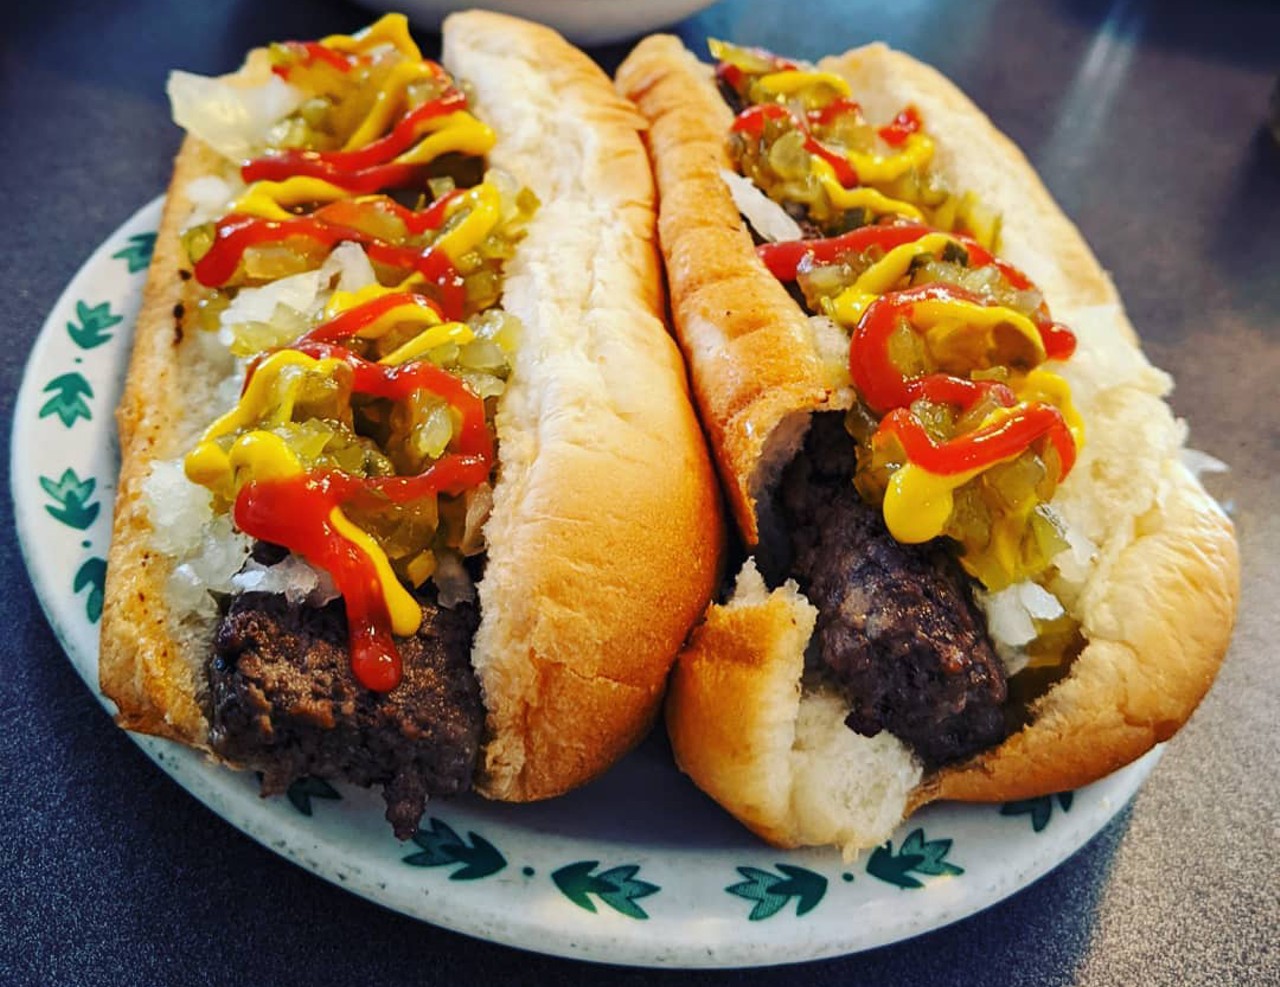 Marcus Hamburgers
6349 E. McNichols Rd., Detroit; 313-891-6170
This hidden gem has been delivering quality burgers and fries since 1929 with a twist — the burgers are shaped like rectangles, served on a hot dog bun. Stop by for a taste of classic Detroit.